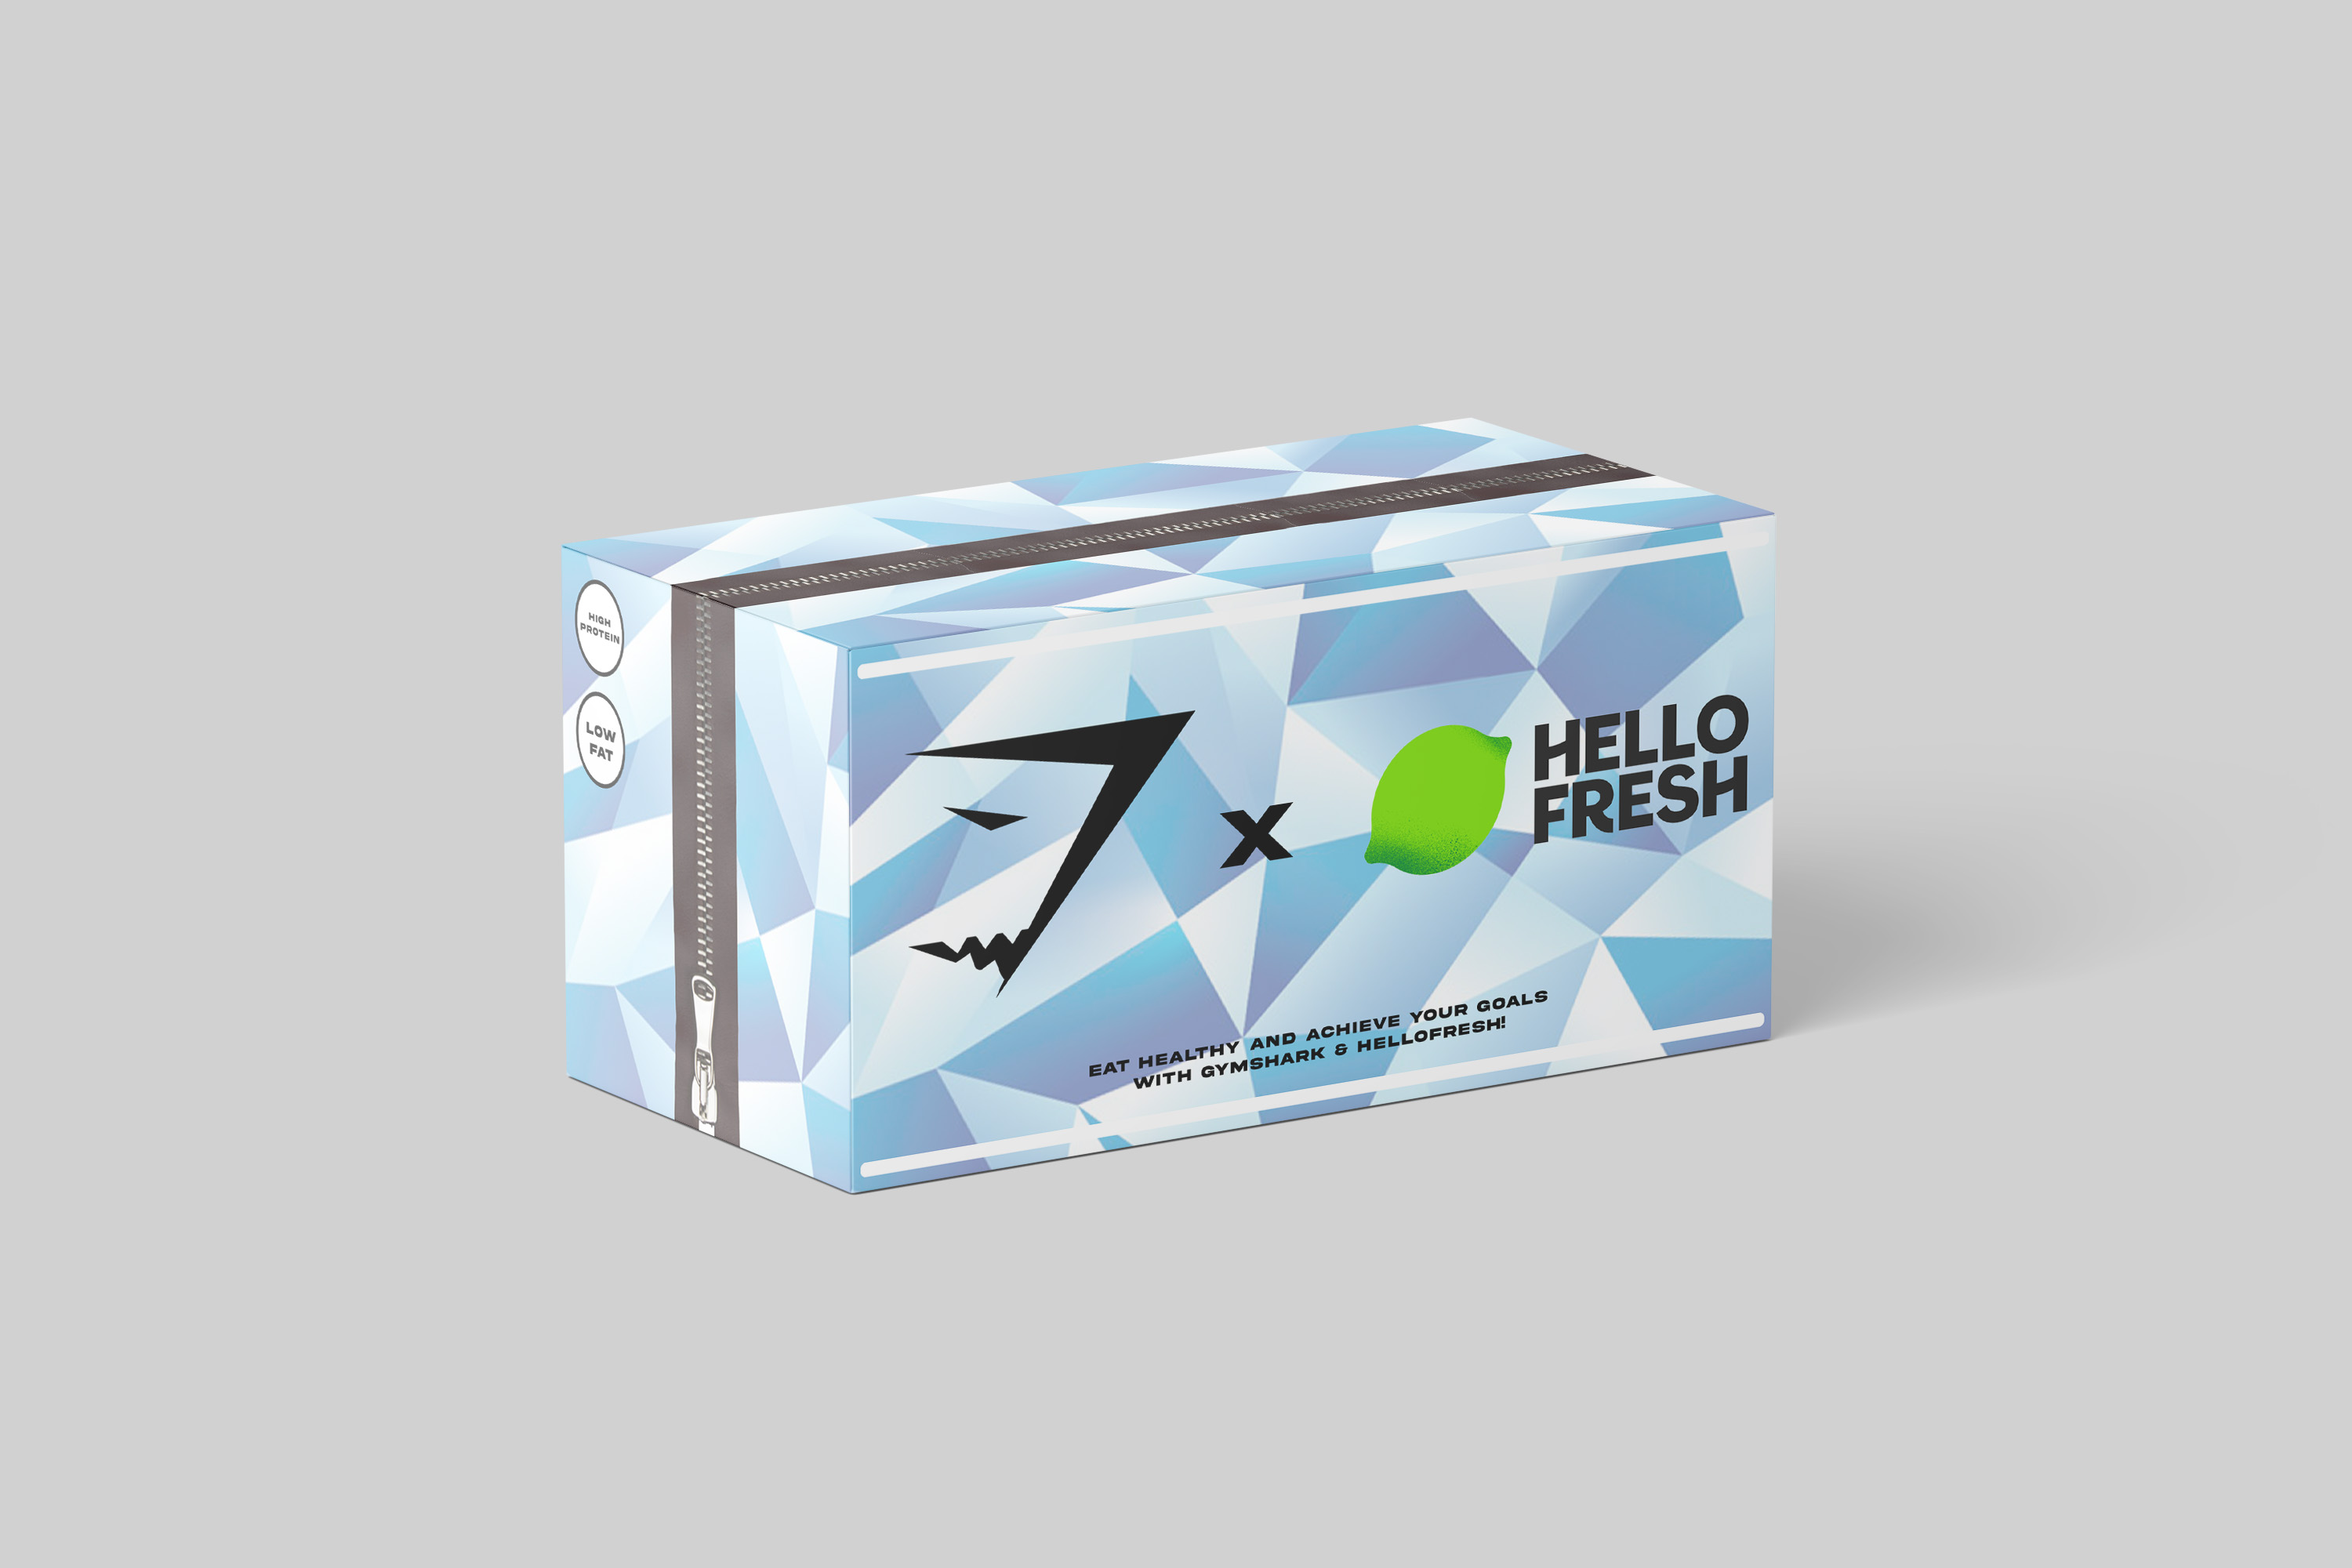 Mocked up packaging design for a collaboration between Gym Shark and Hello Fresh, the rectangular carton has an abstract light blue pattern